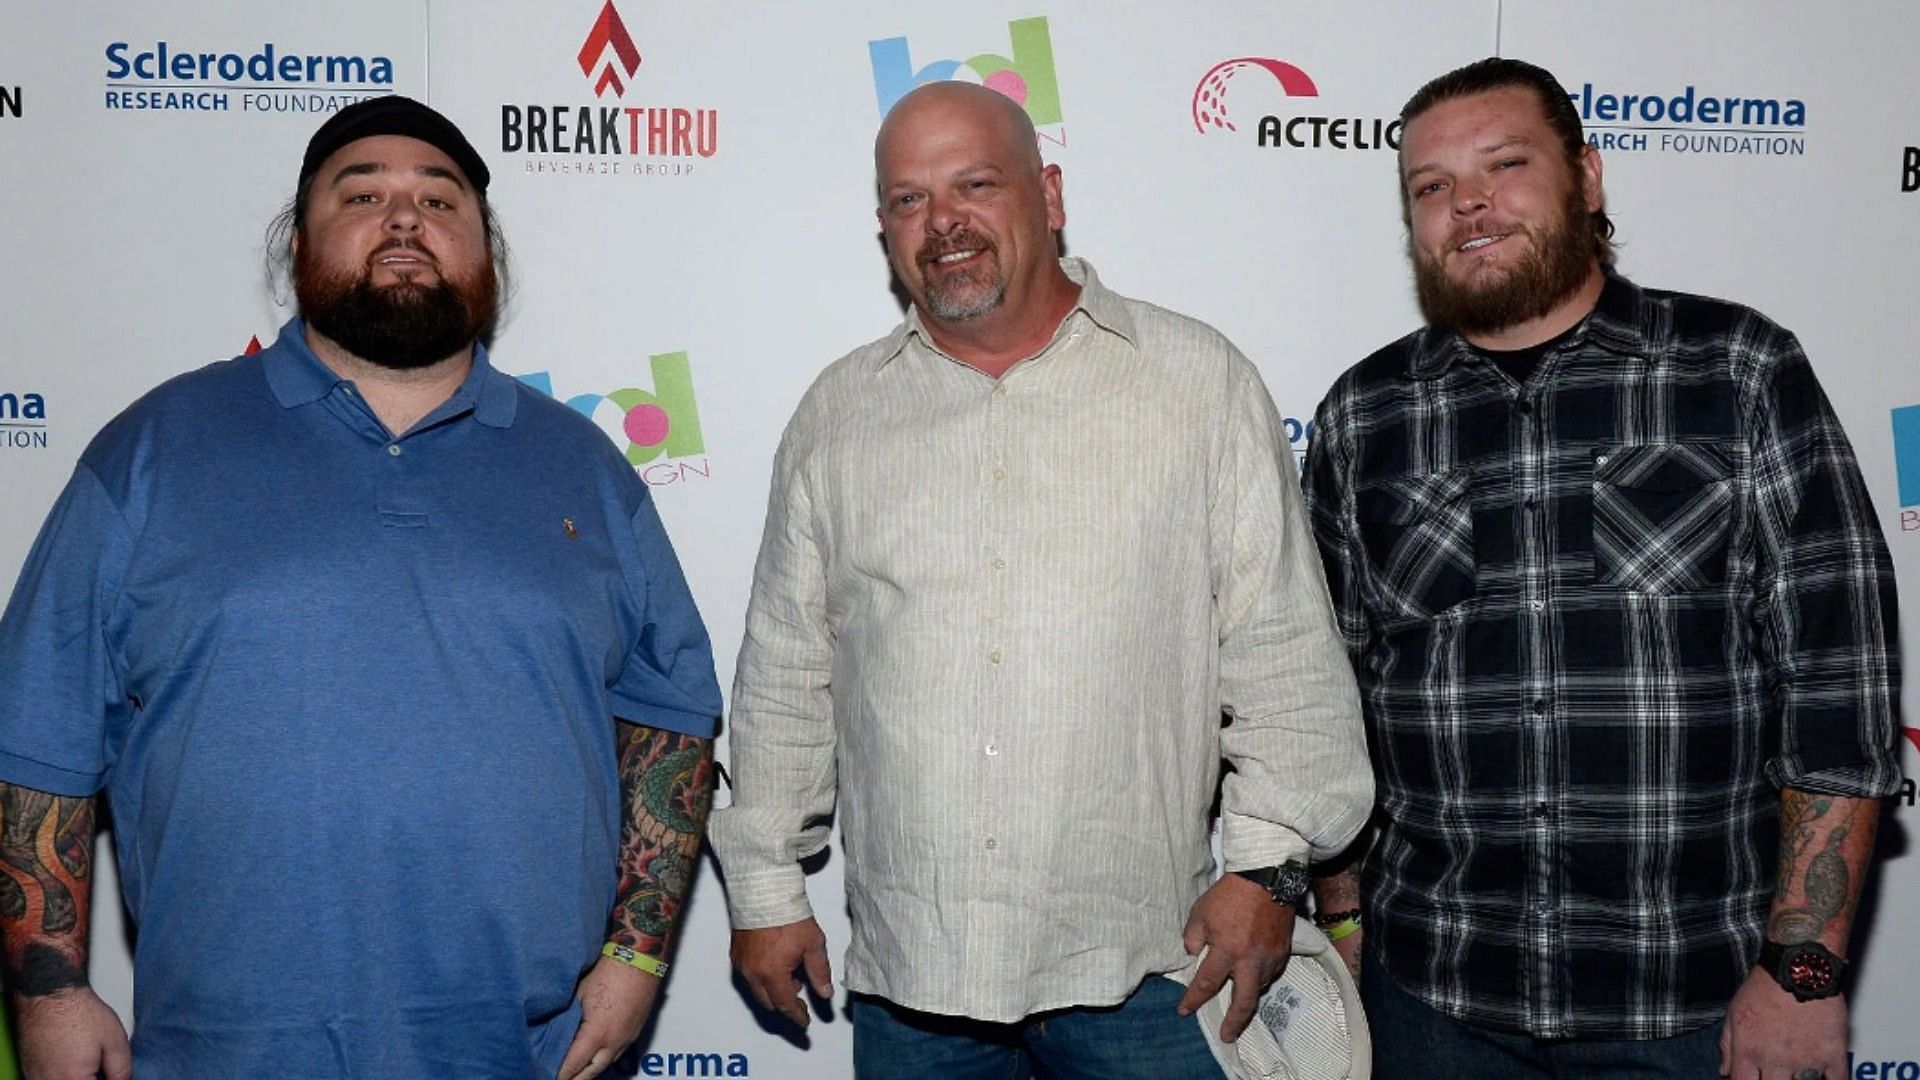 Rick Harrison and his sons attending Scleroderma Research Foundations